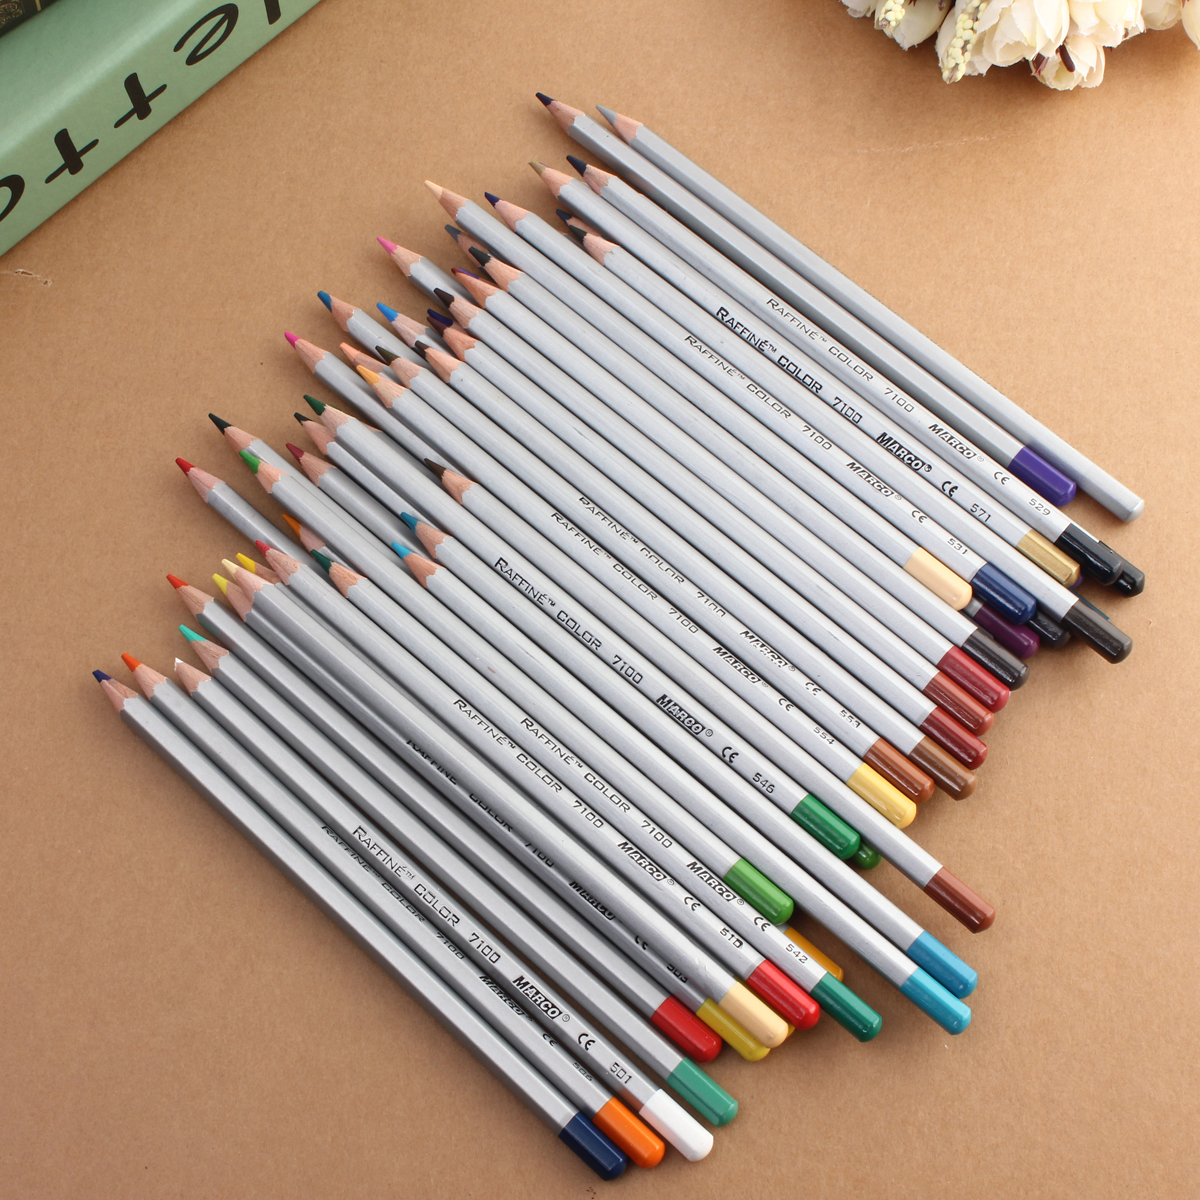 72-Colors-Art-Drawing-Pencil-Set-Oil-Non-toxic-Pencils-Painting-Sketching-Drawing-Stationery-School--973251-7